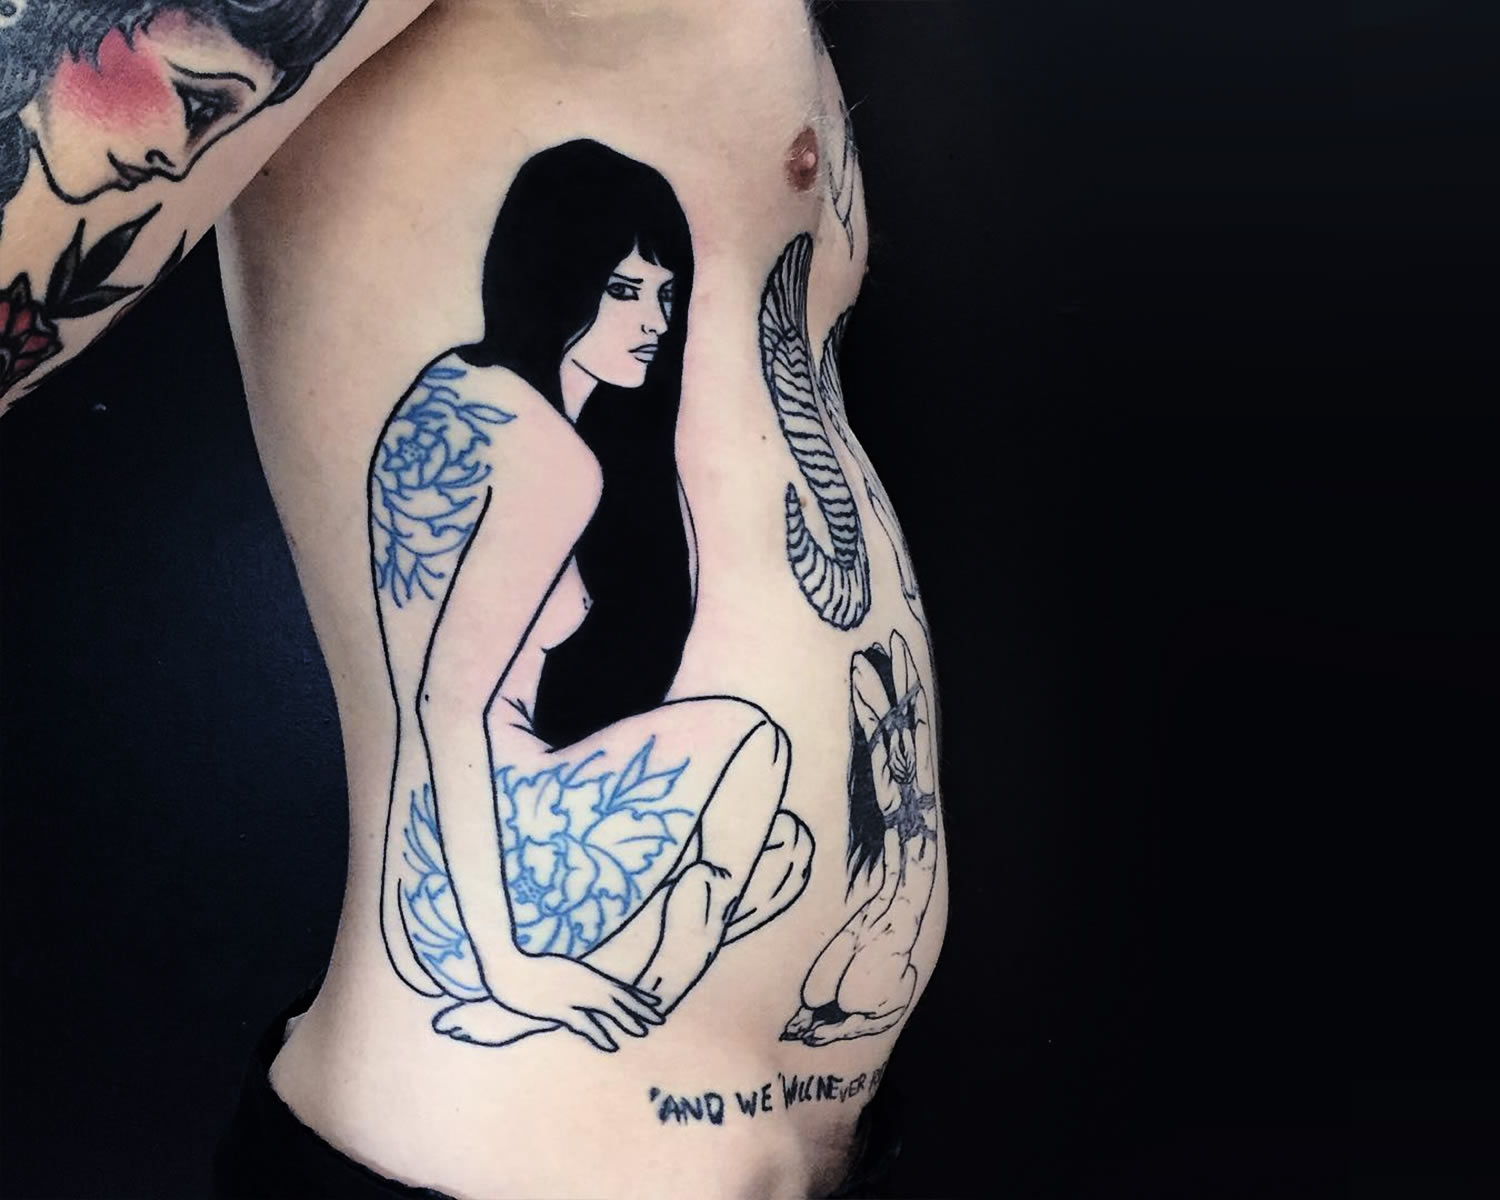 tattoo of a woman with blue (flowery) tattoos, side of body